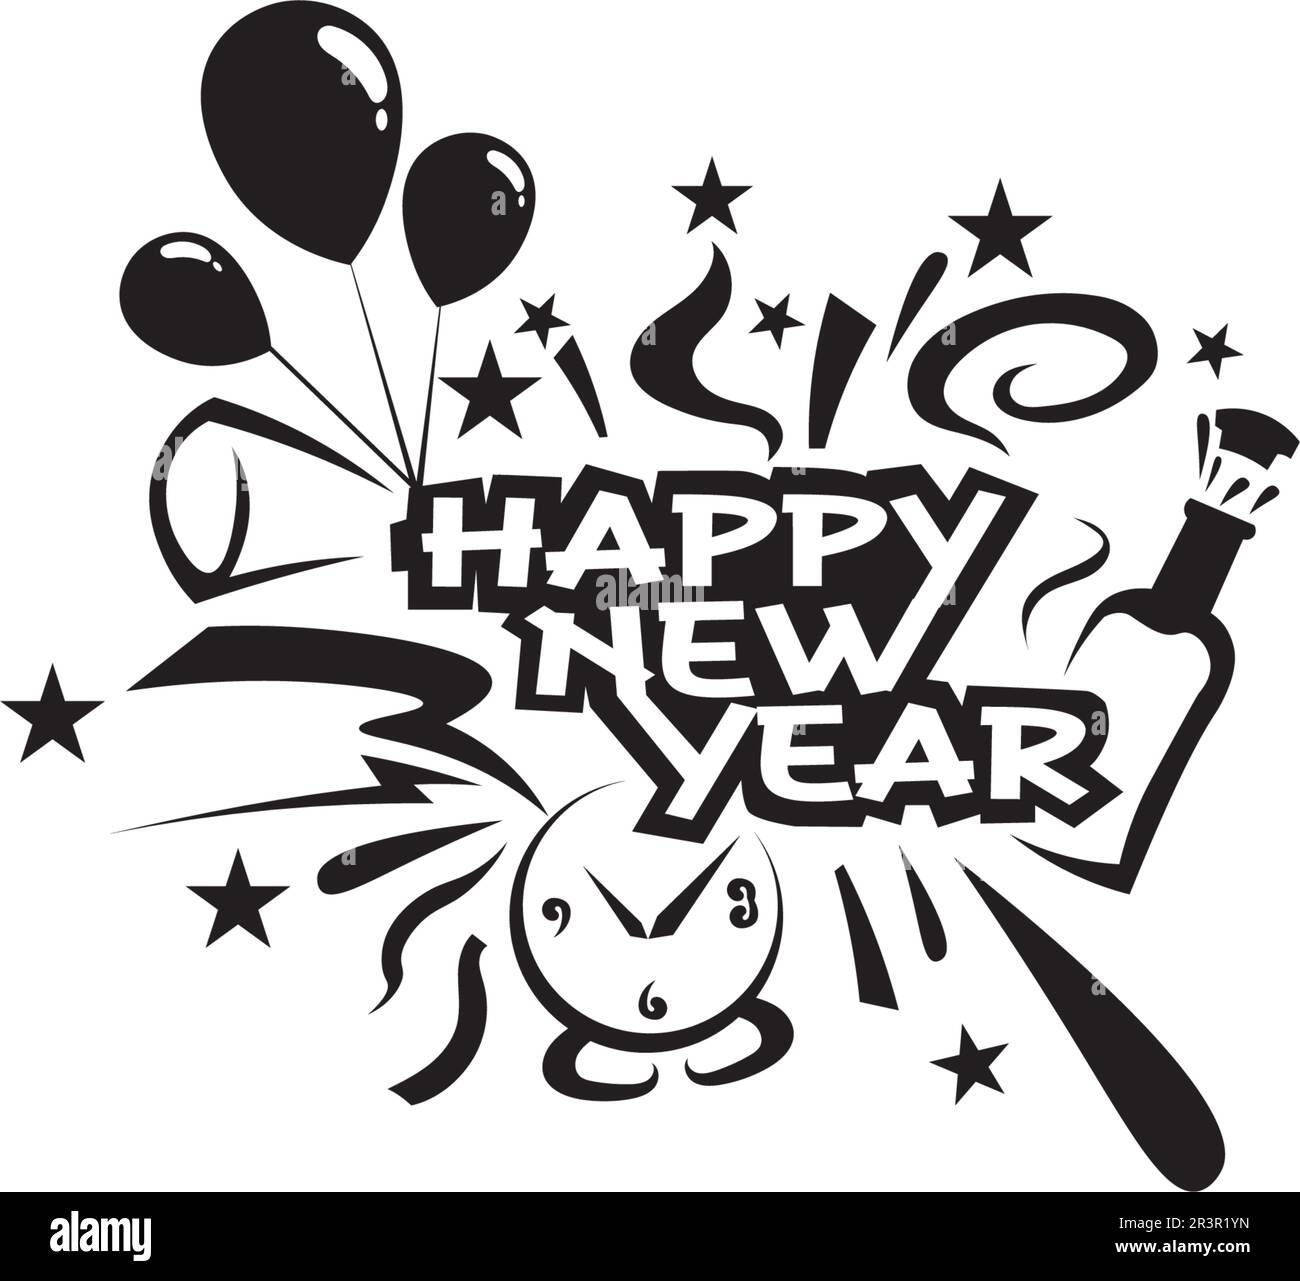 Happy New Year vector design and text Stock Vector